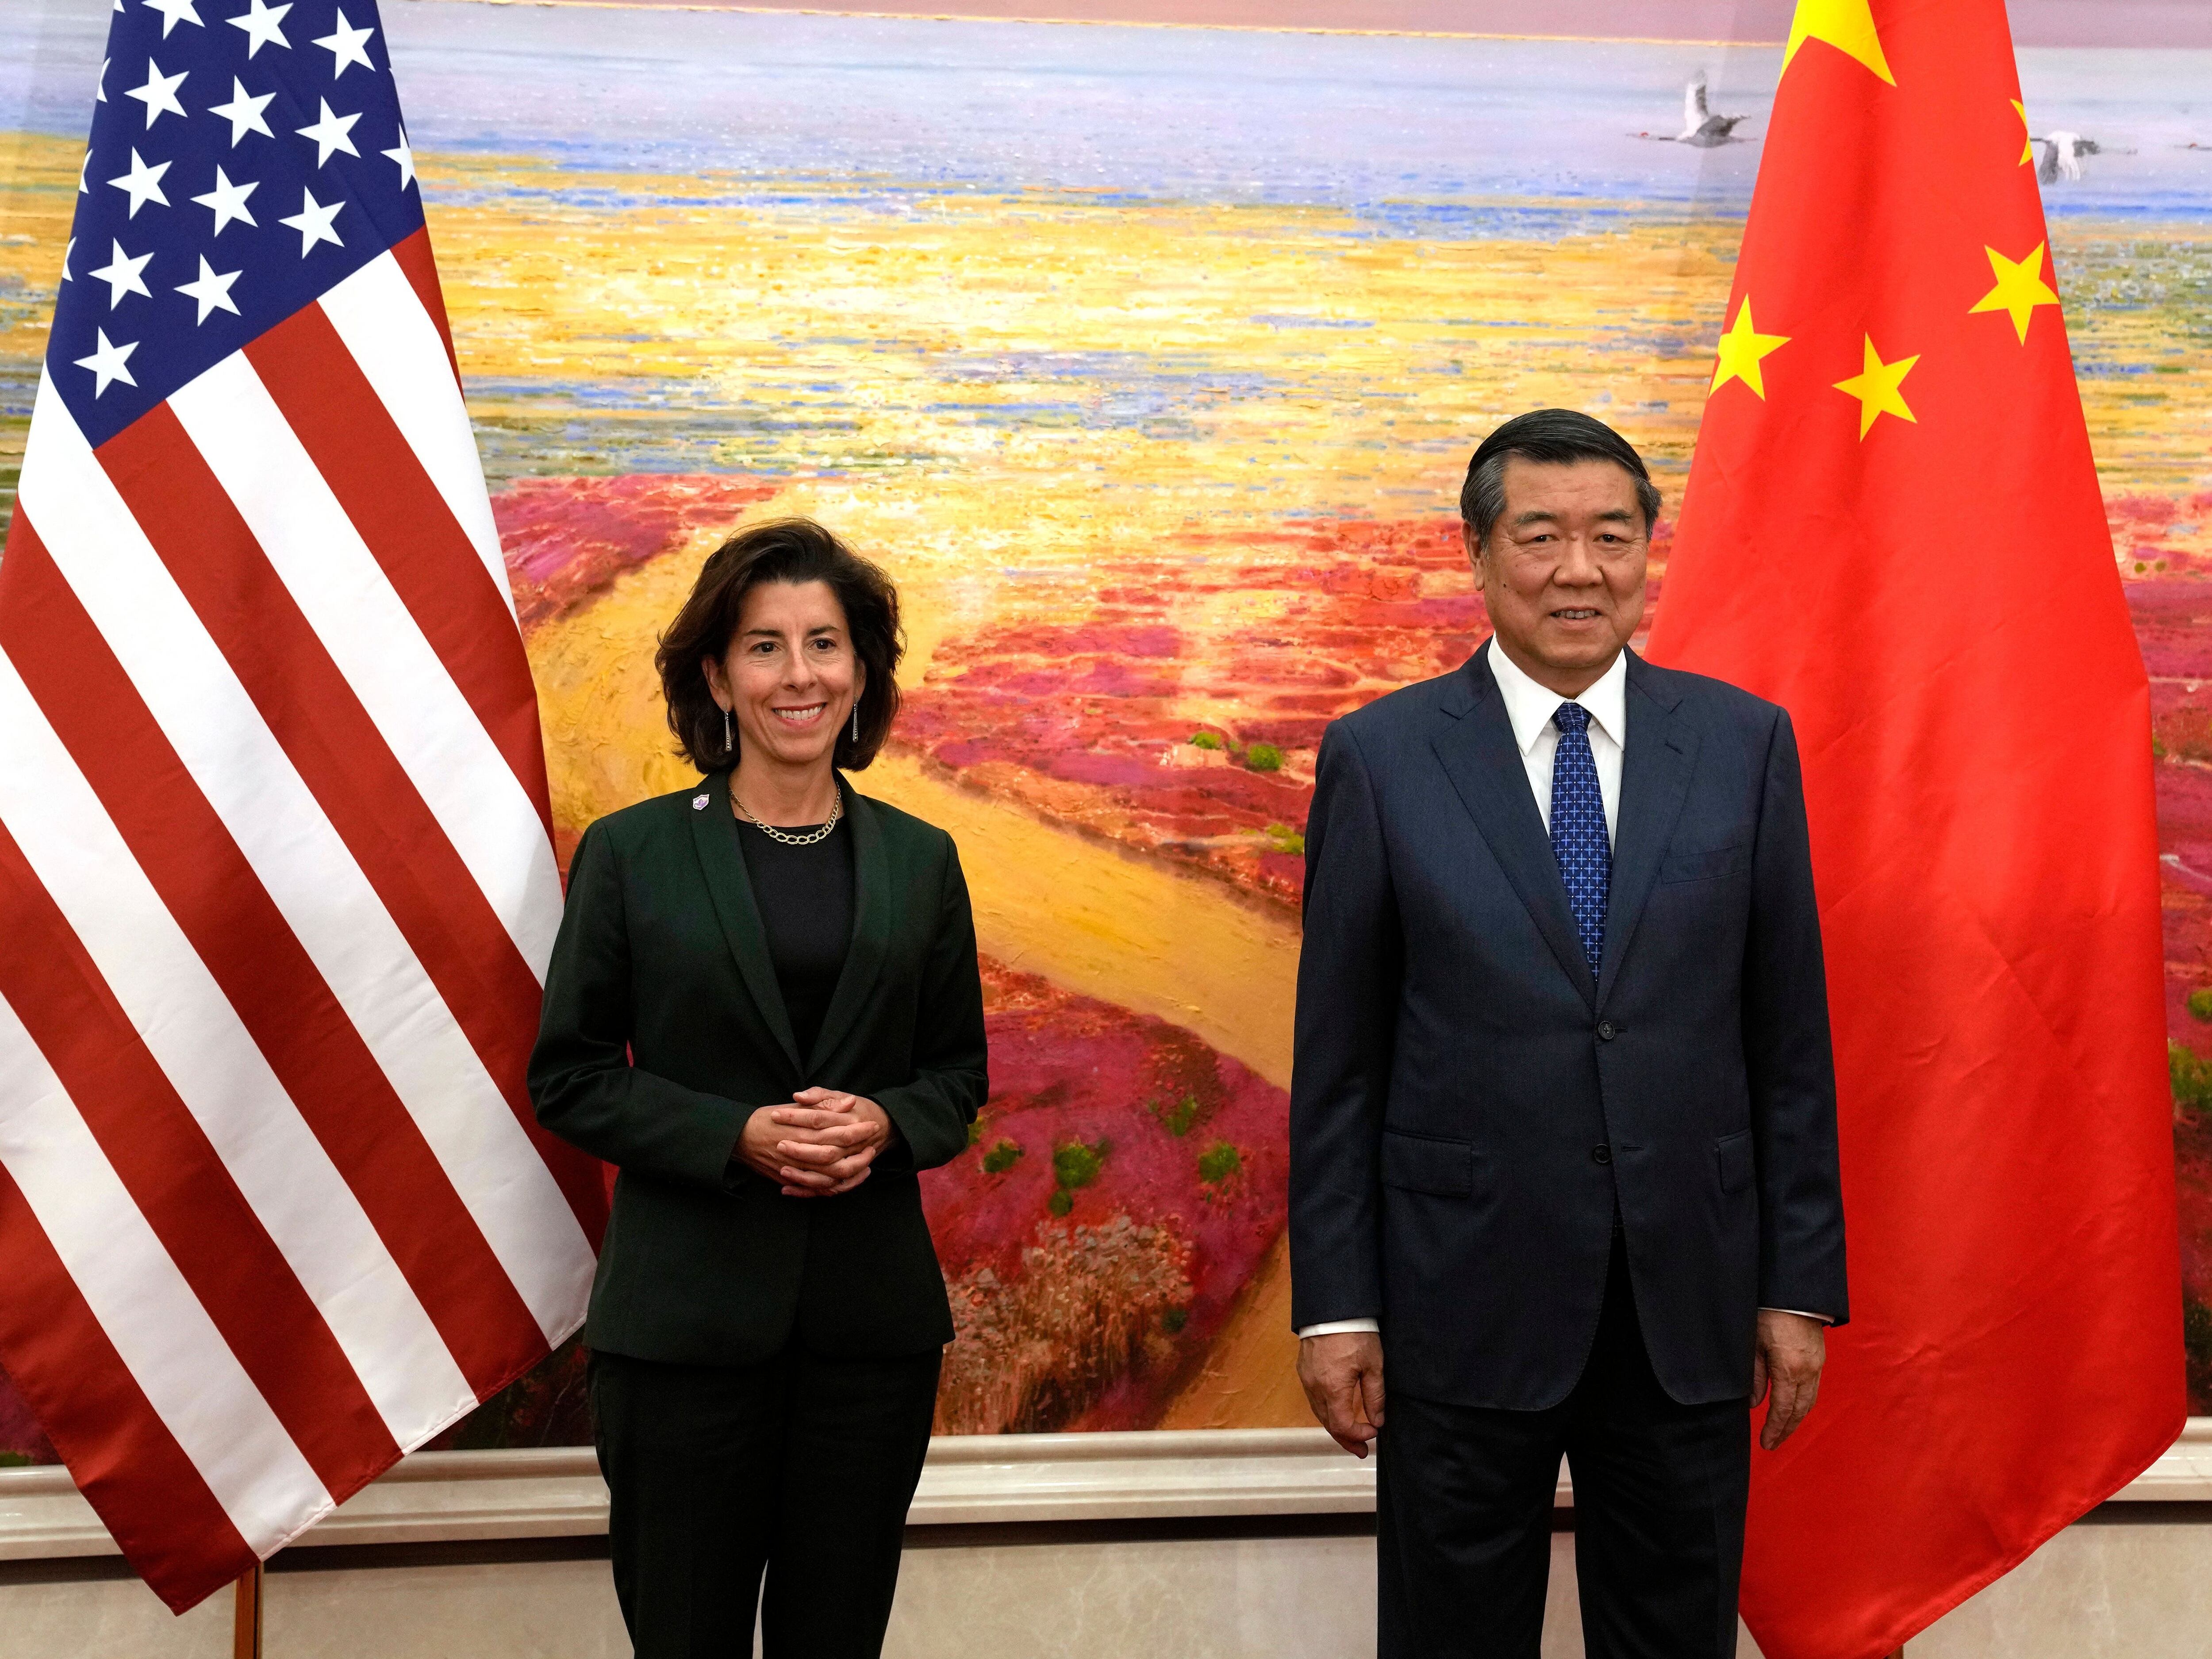 Chinese official tells US commerce secretary he is ready to improve co-operation